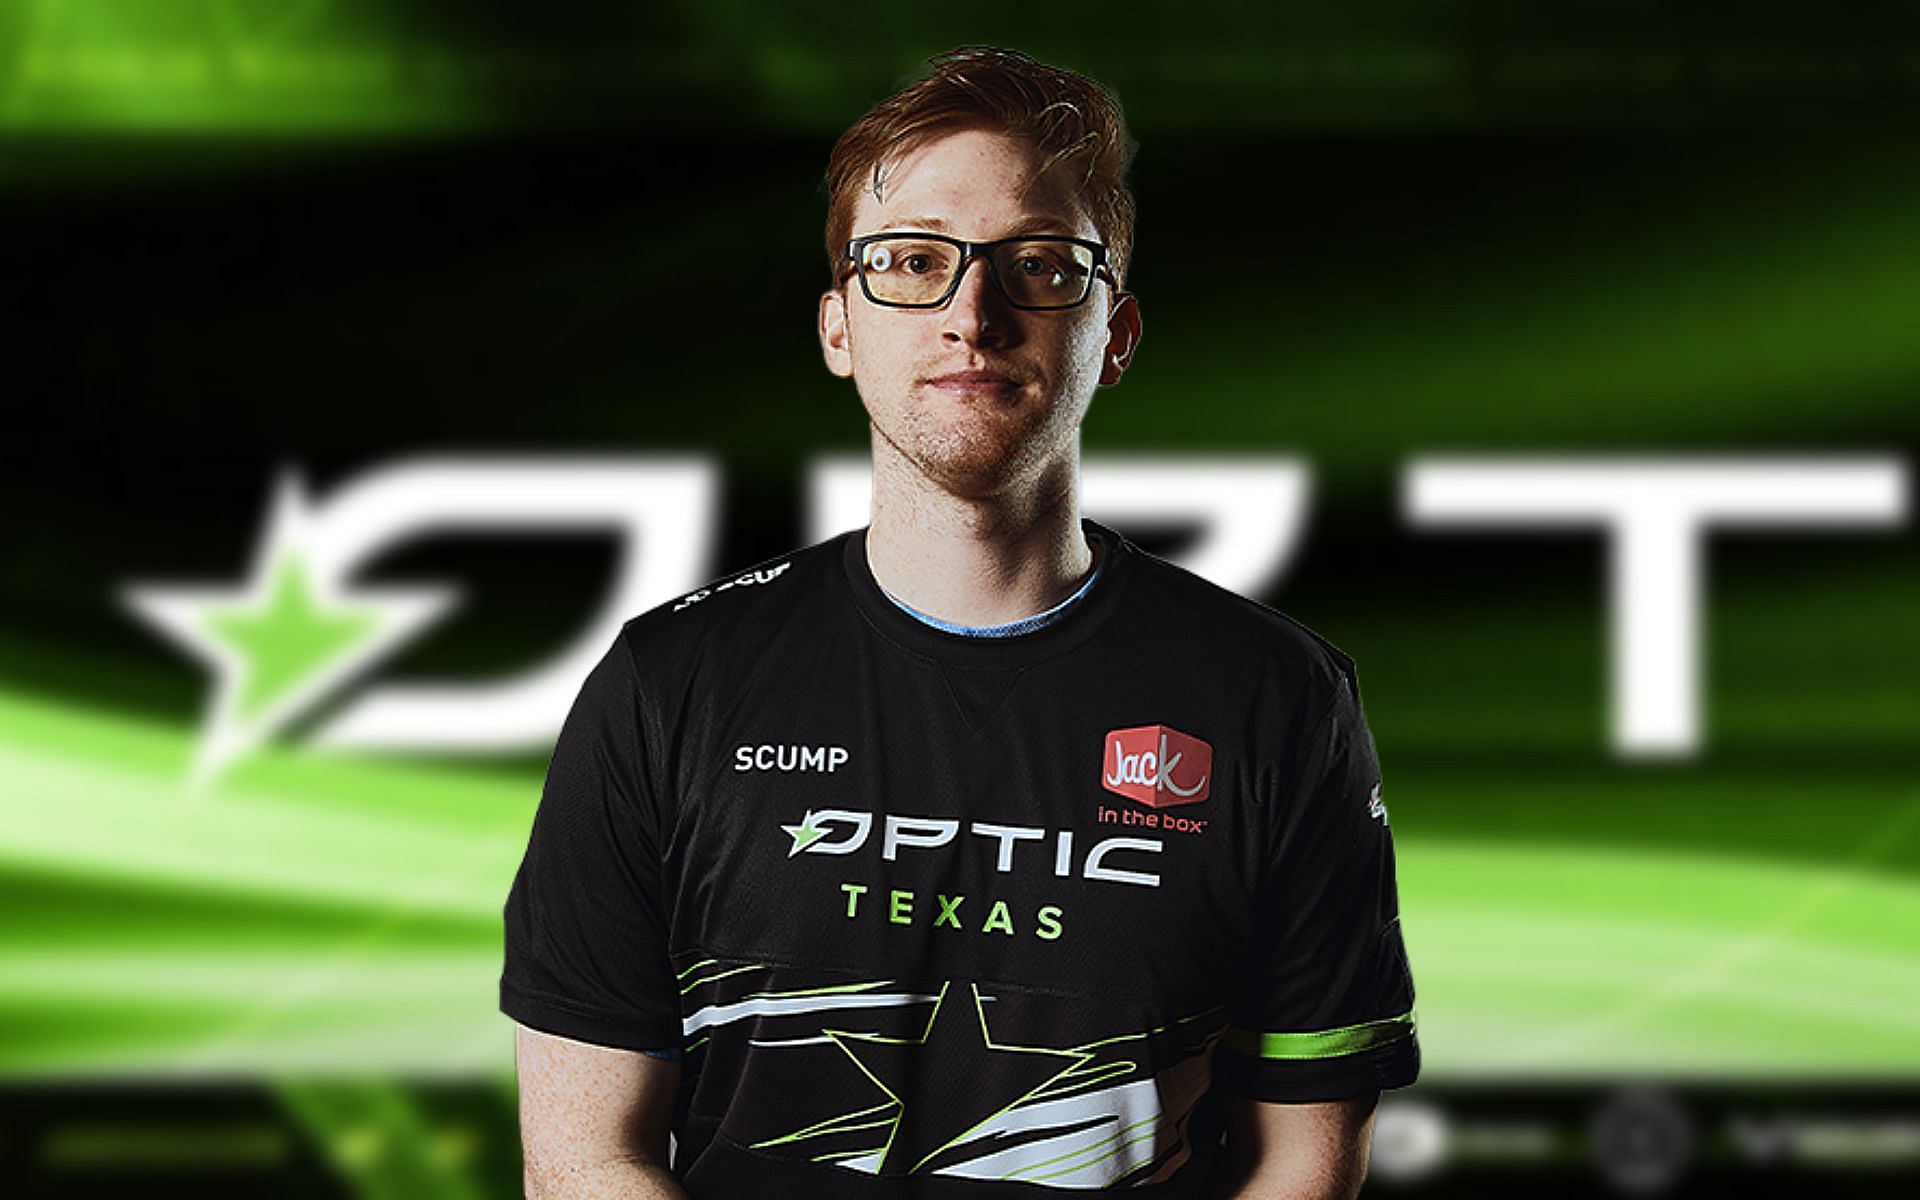 CDL retired player Scump